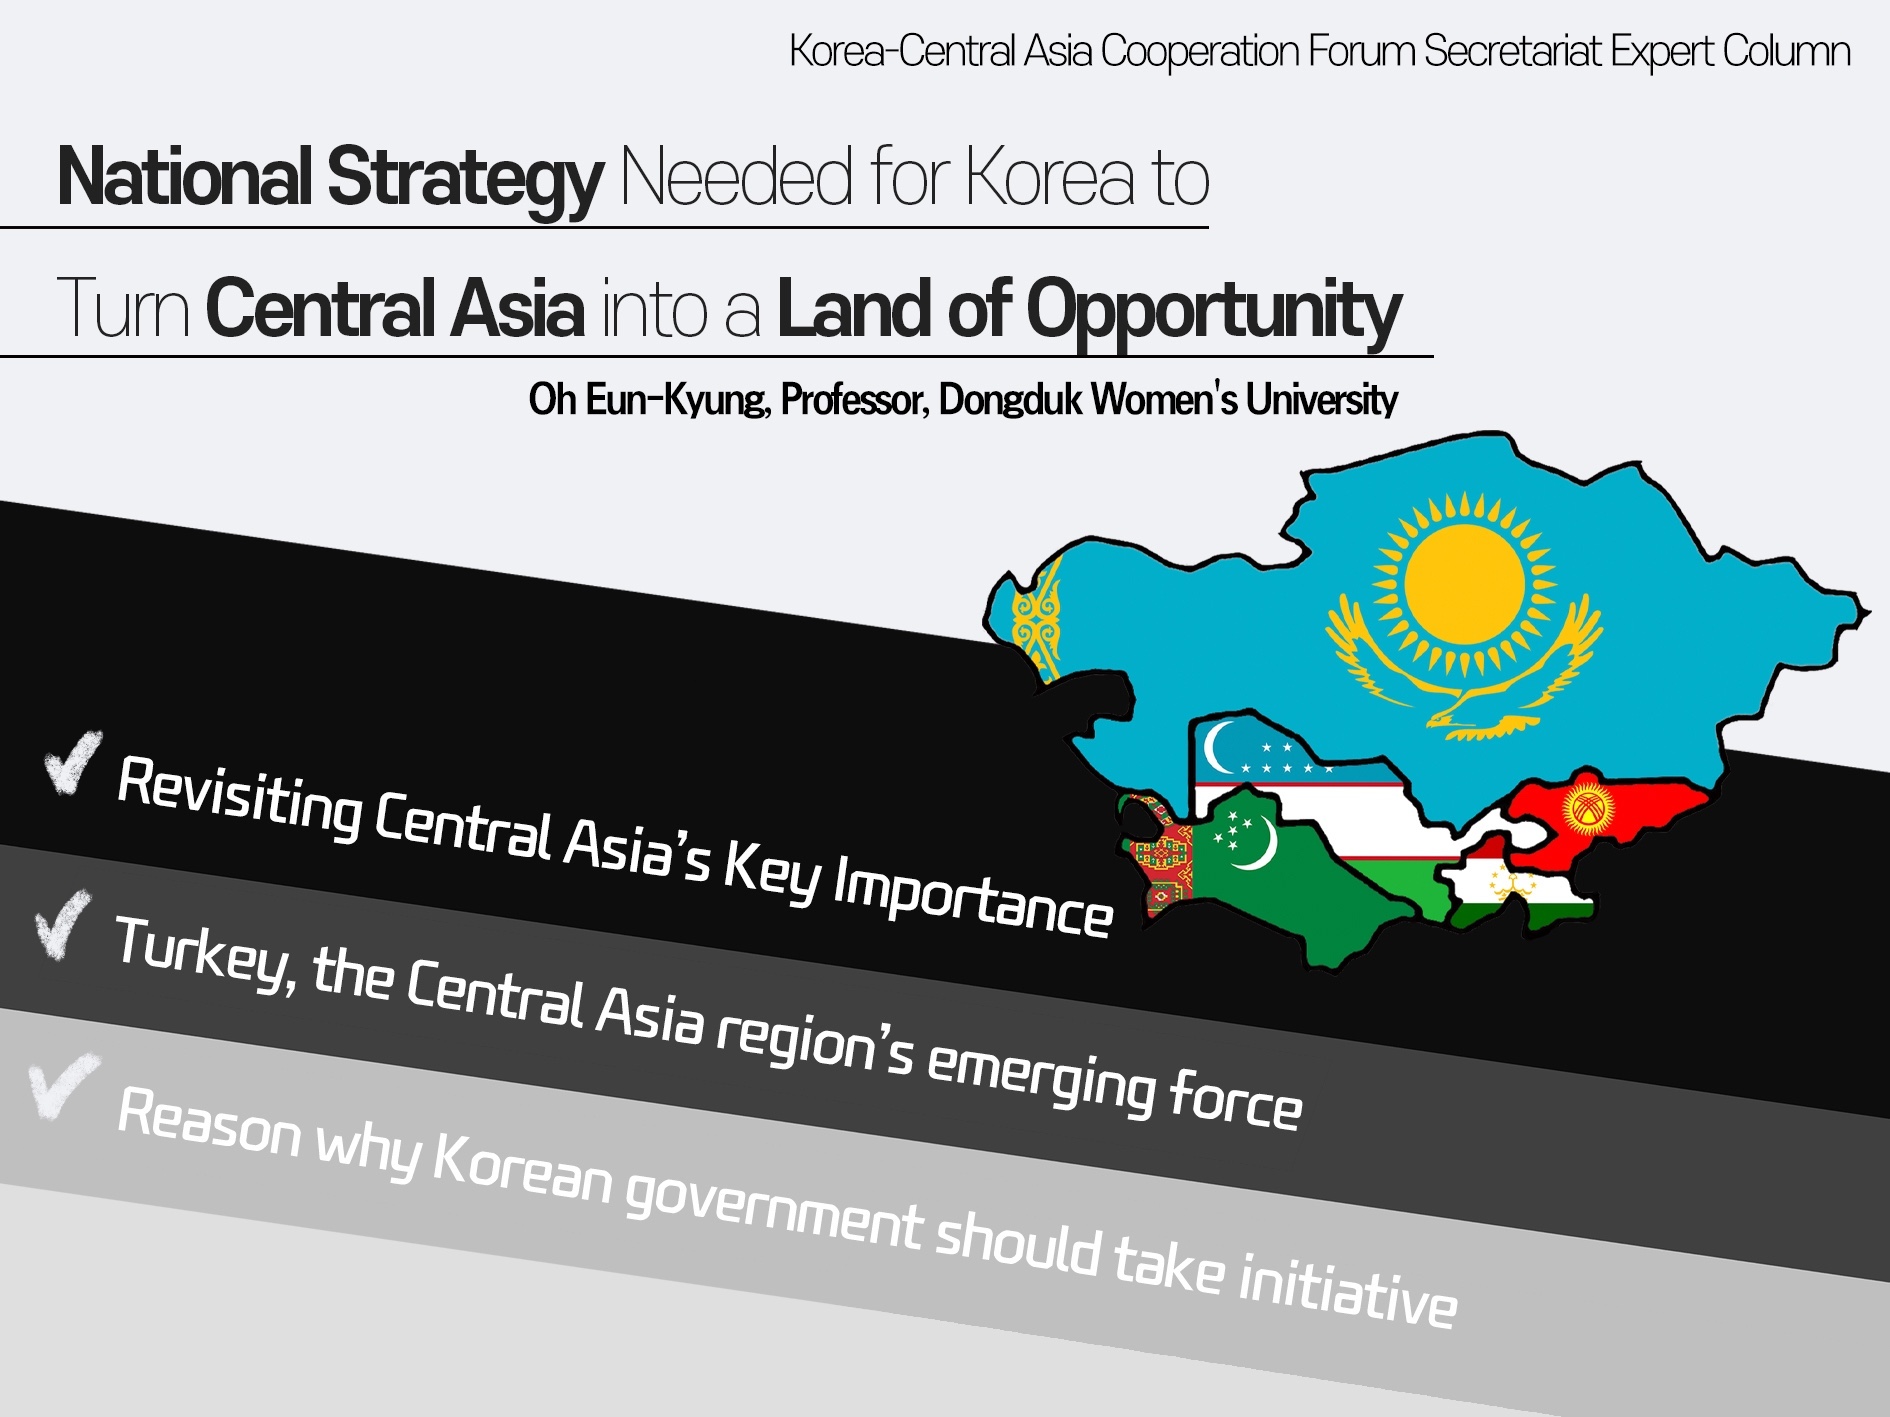 [Special contribution article ] National Strategy Needed for Korea to Turn Central Asia into a Land of Opportunity